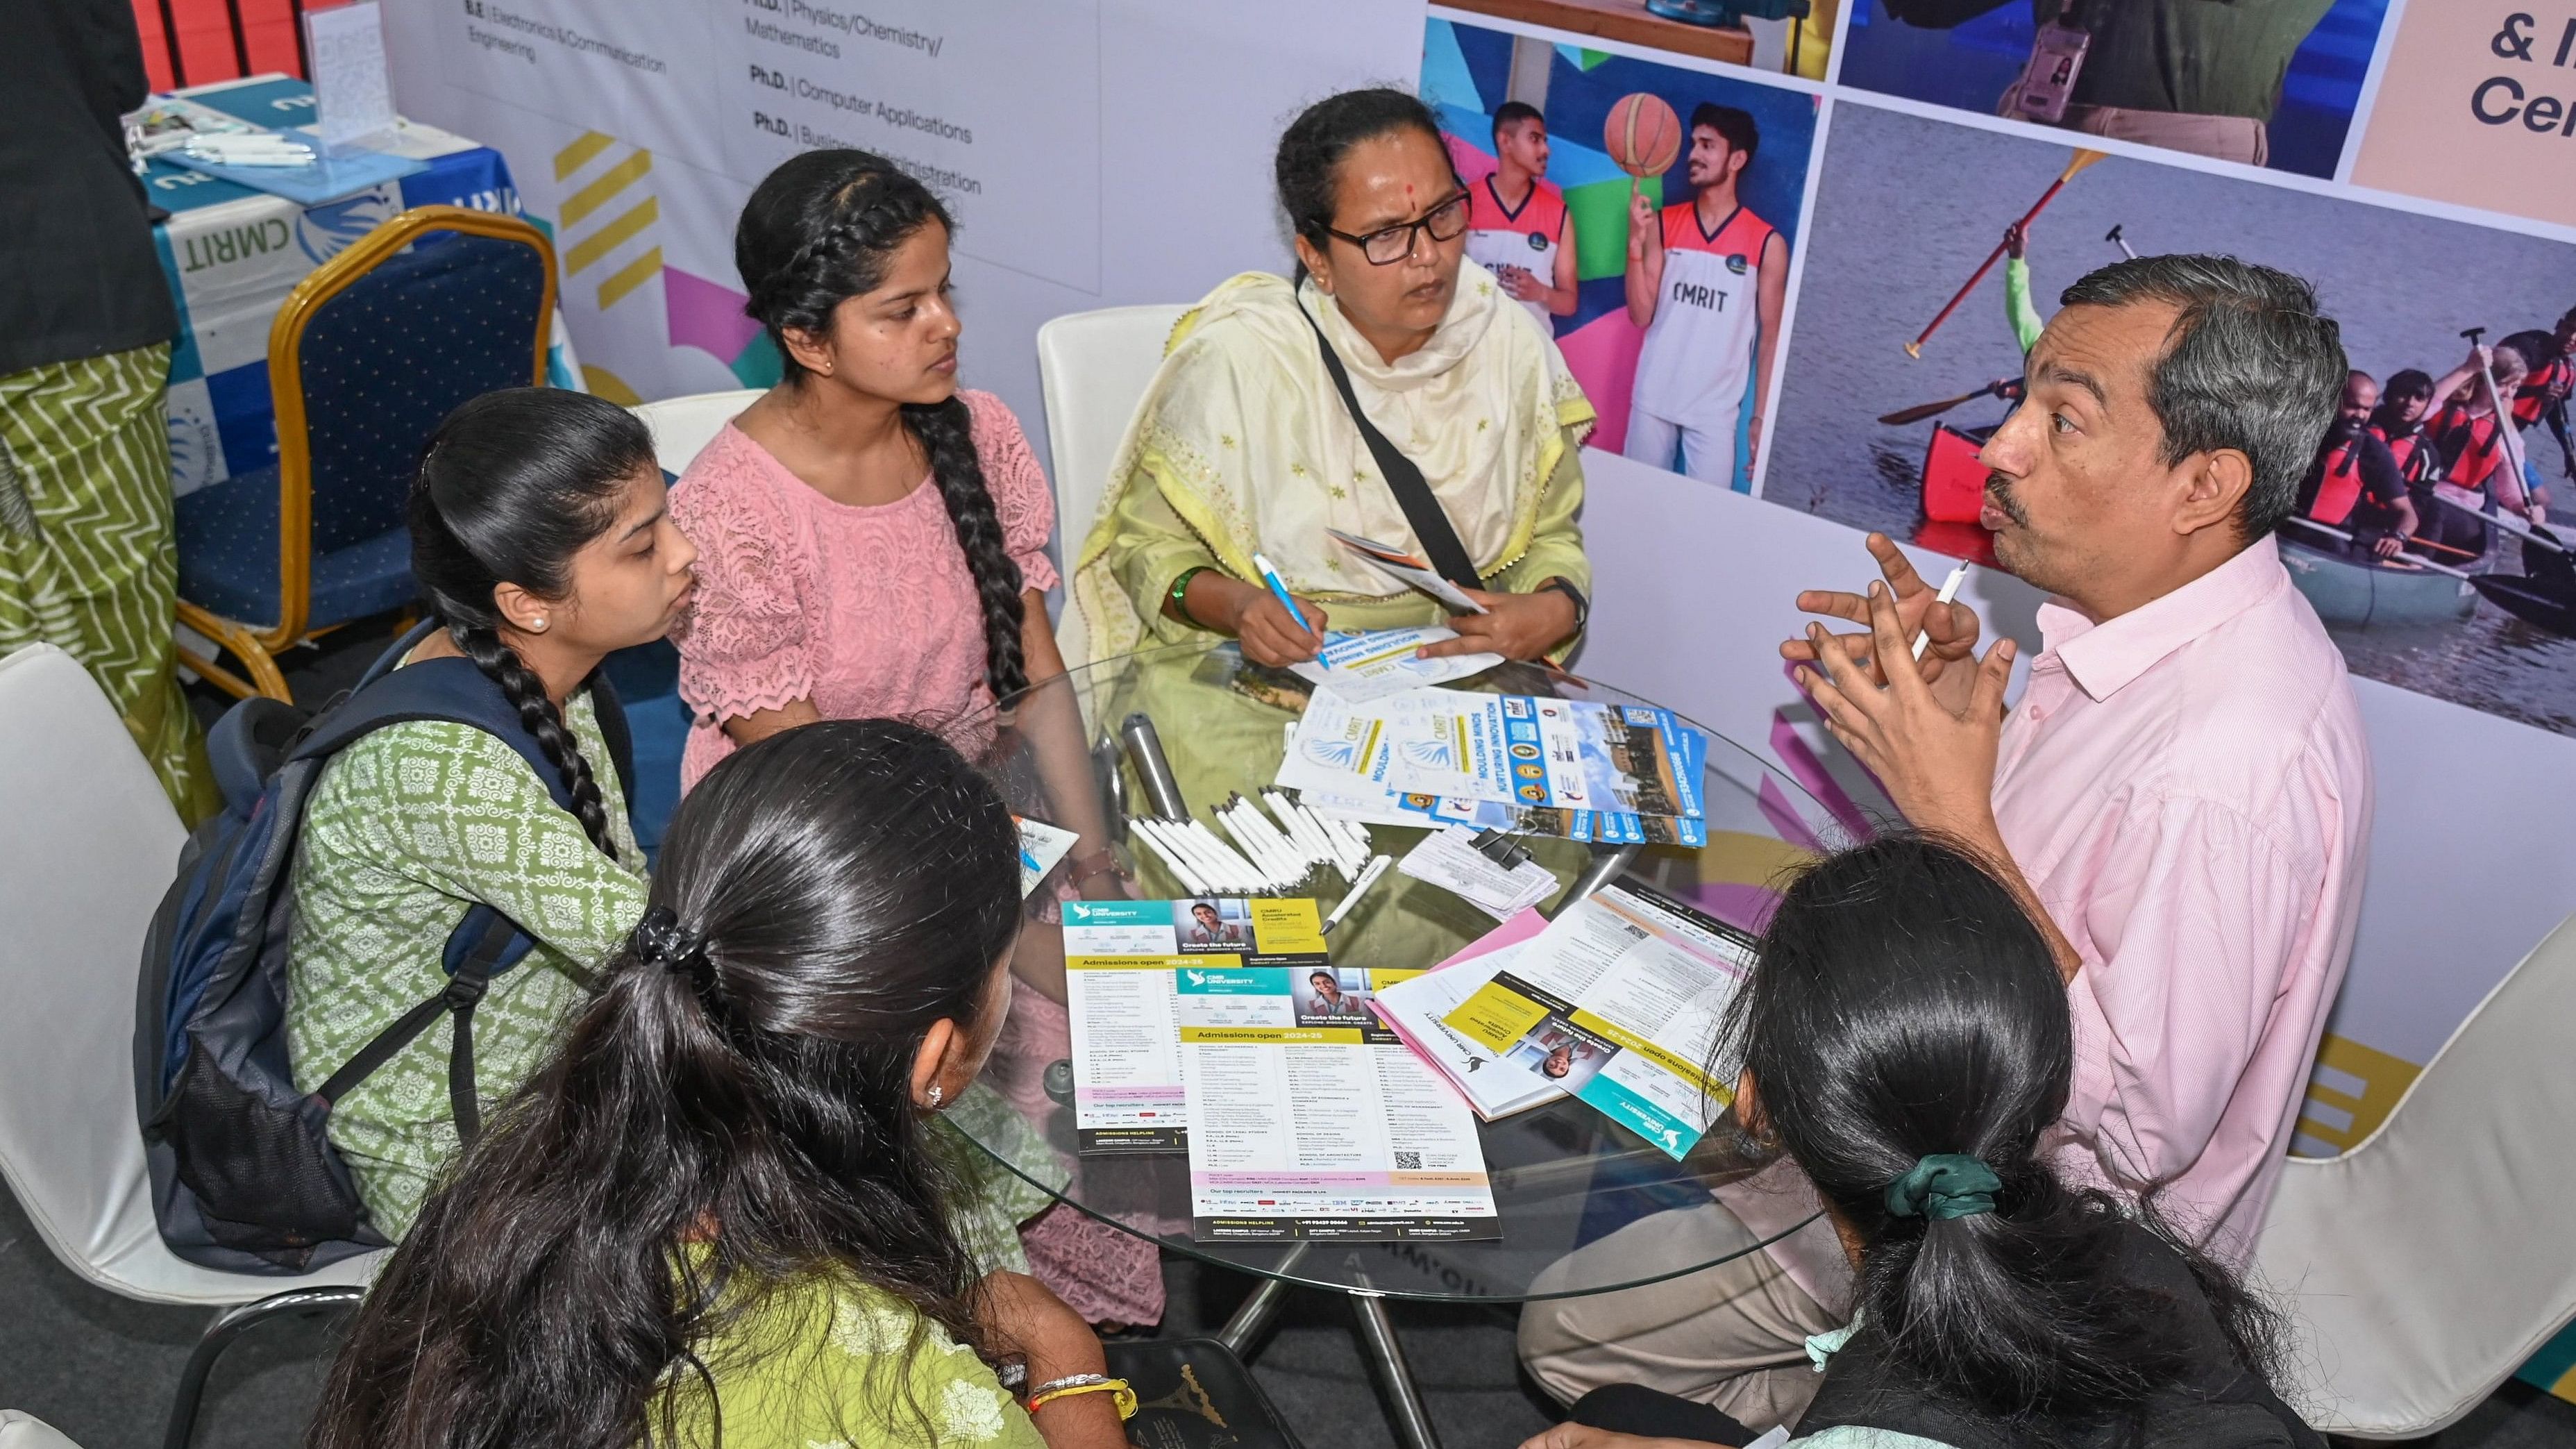 <div class="paragraphs"><p>A staffer at a stall gives in-depth explanation about courses on offer at the exhibition. </p></div>